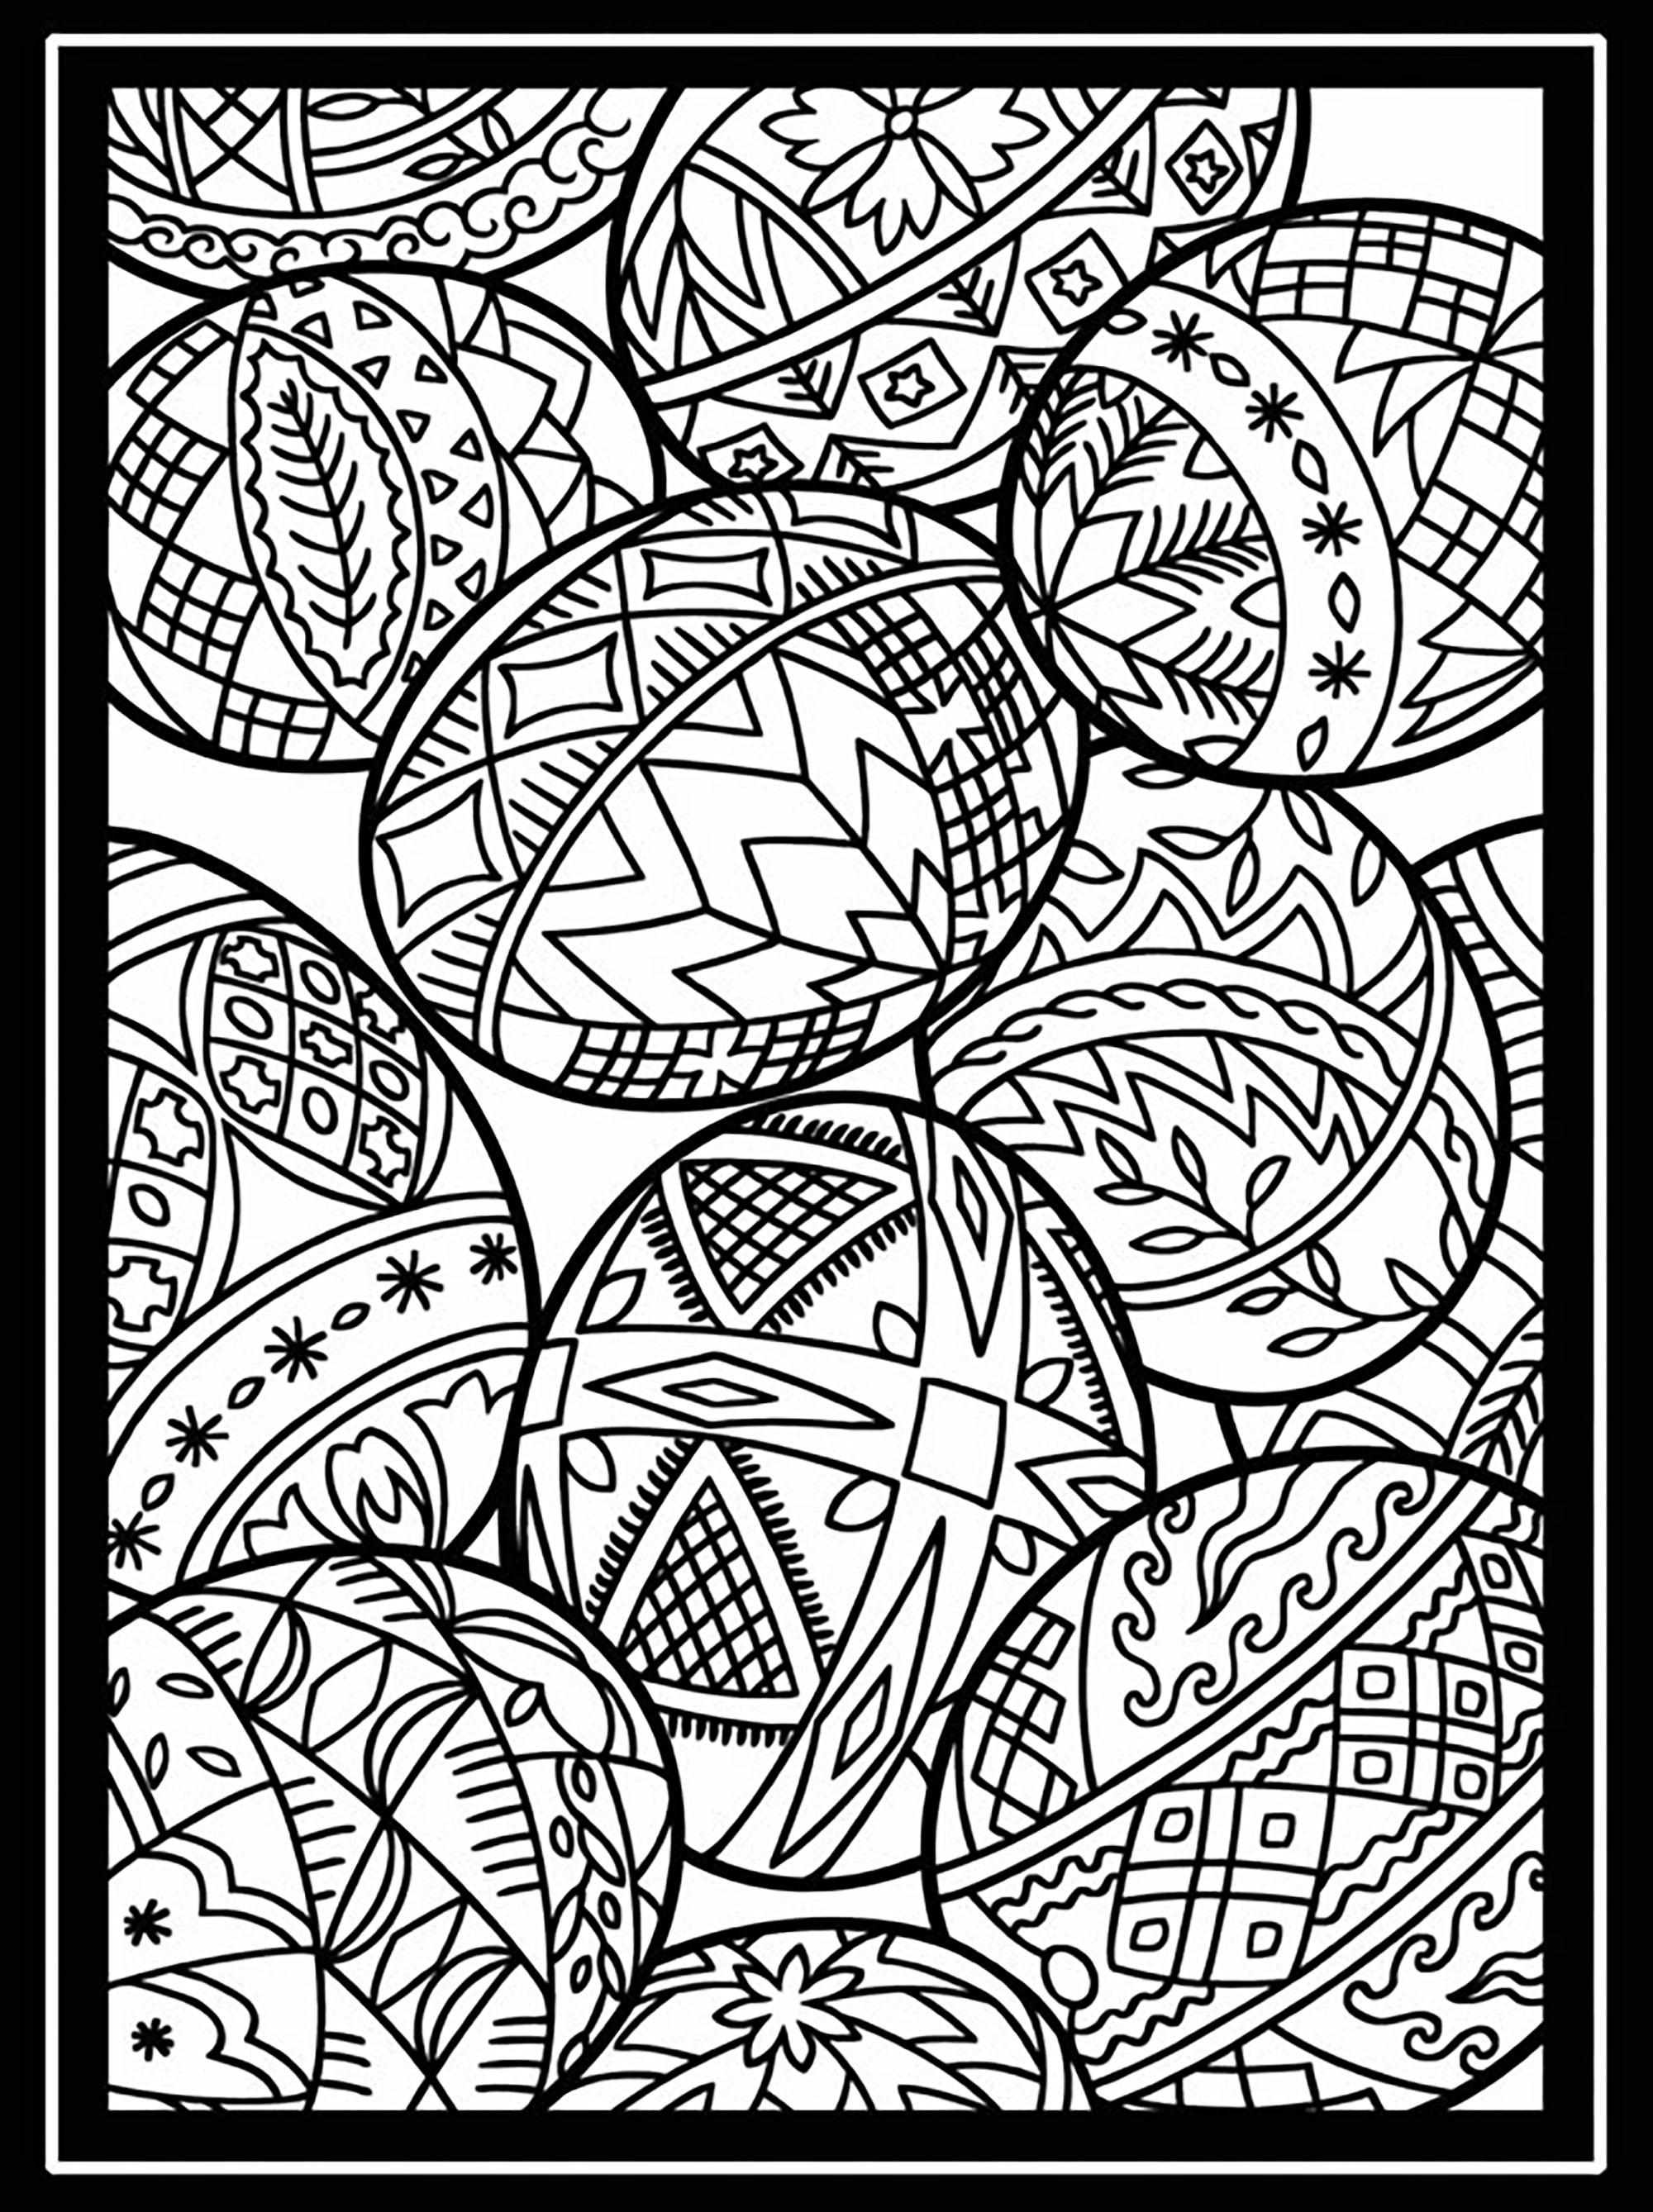 Coloring Pages For Adults Easter Easter Eggs With Large Border Easter Adult Coloring Pages